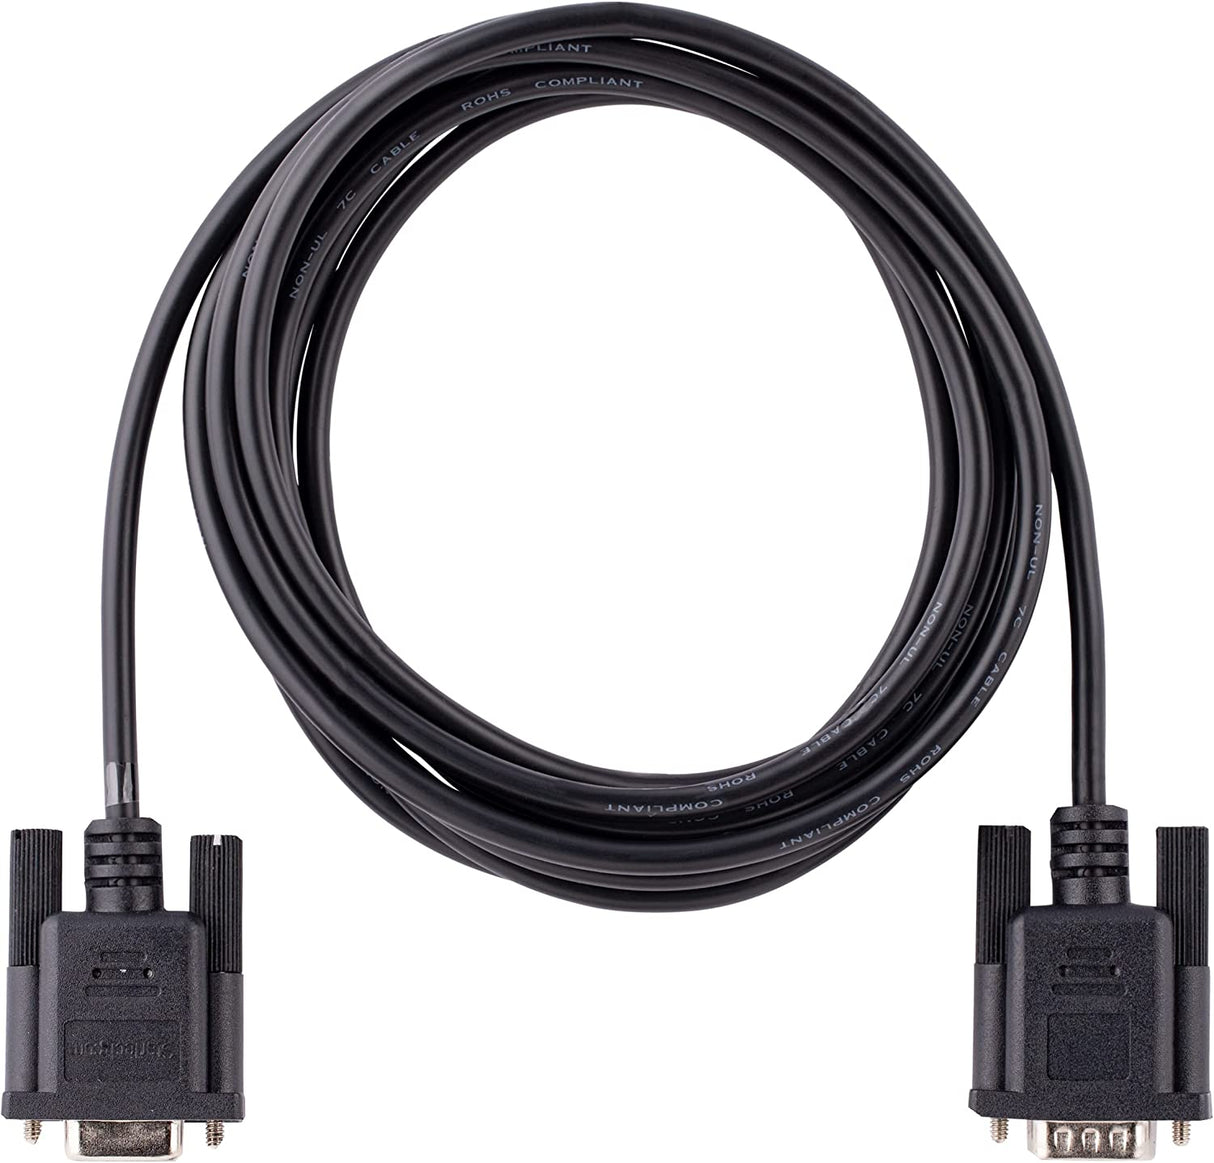 StarTech.com 3m RS232 Serial Null Modem Cable, Crossover Serial Cable w/Al-Mylar Shielding, DB9 Serial COM Port Cable Female to Male, Compatible w/DTE Devices, Black, F/M (9FMNM-3M-RS232-CABLE)